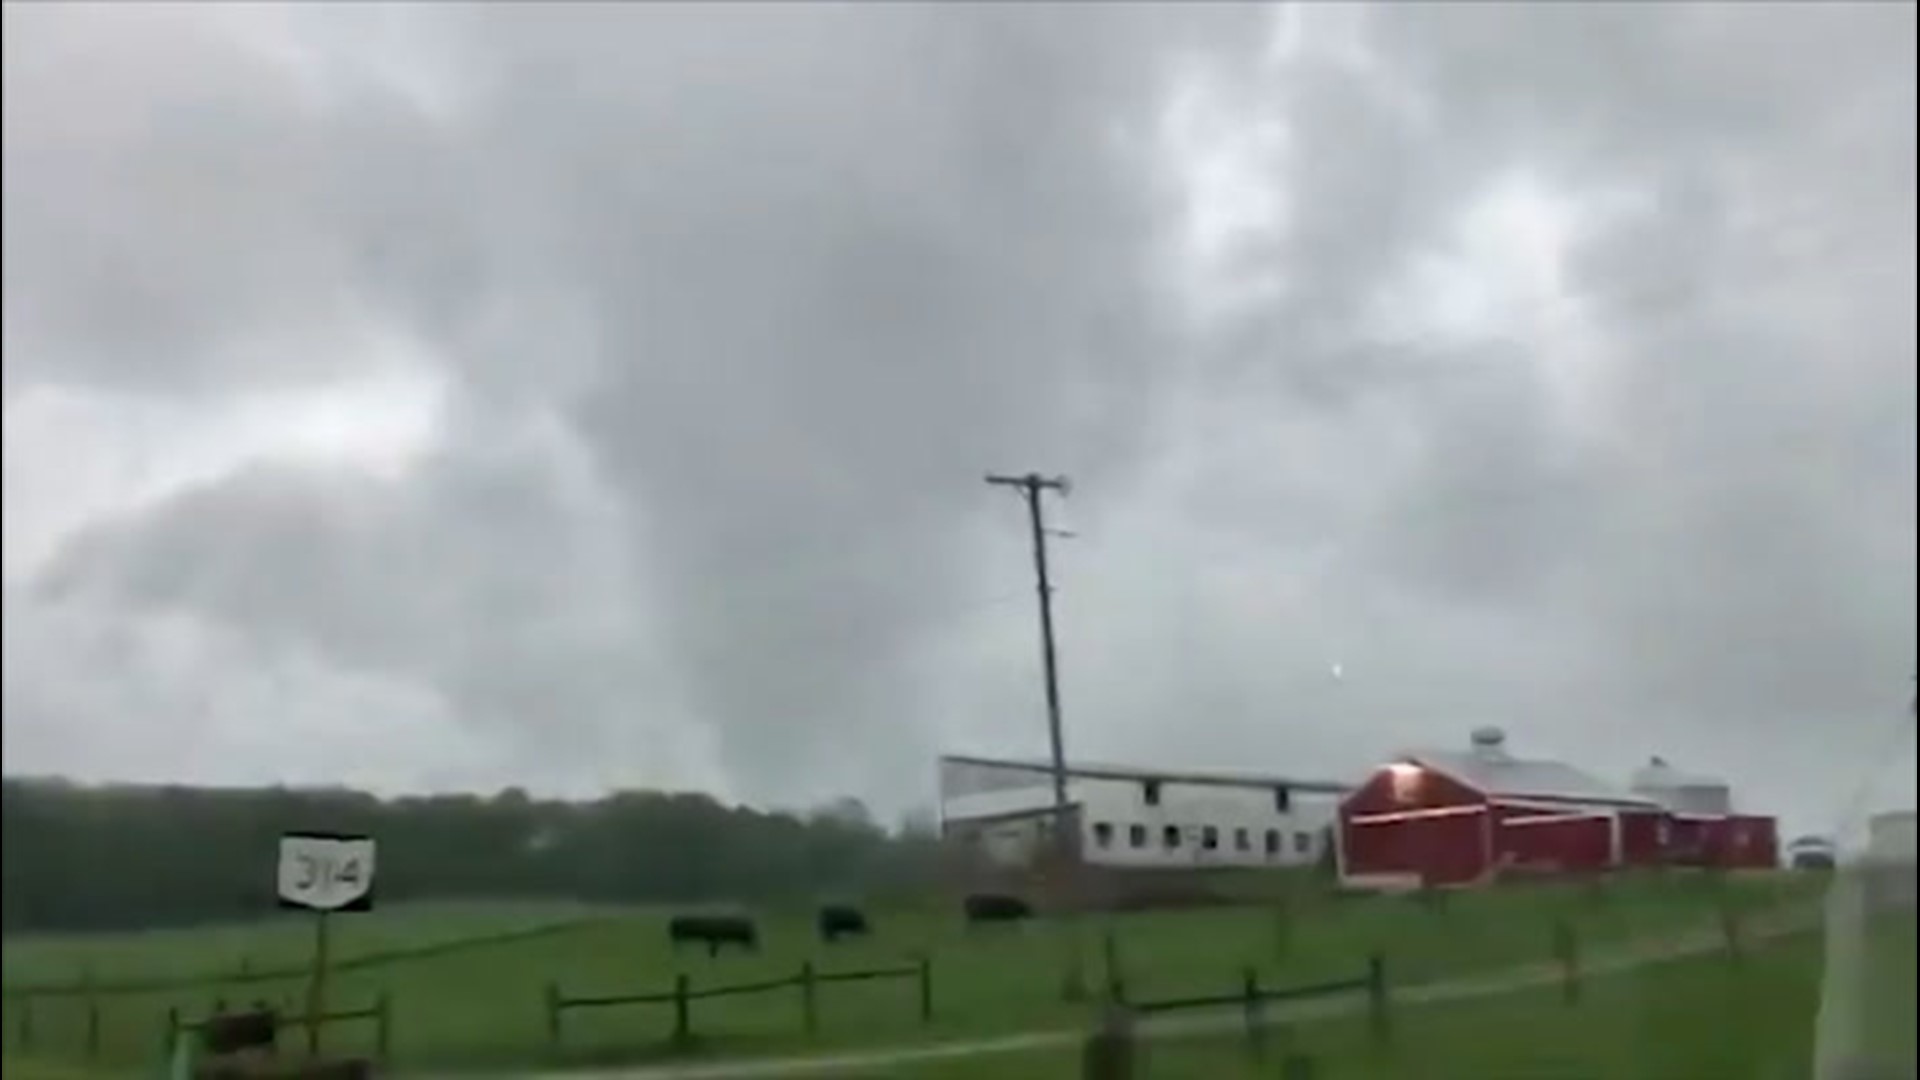 This tornado touched down in Madison County, Ohio, on May 18. At the time of the tornado, there were no reports of damage or injuries.